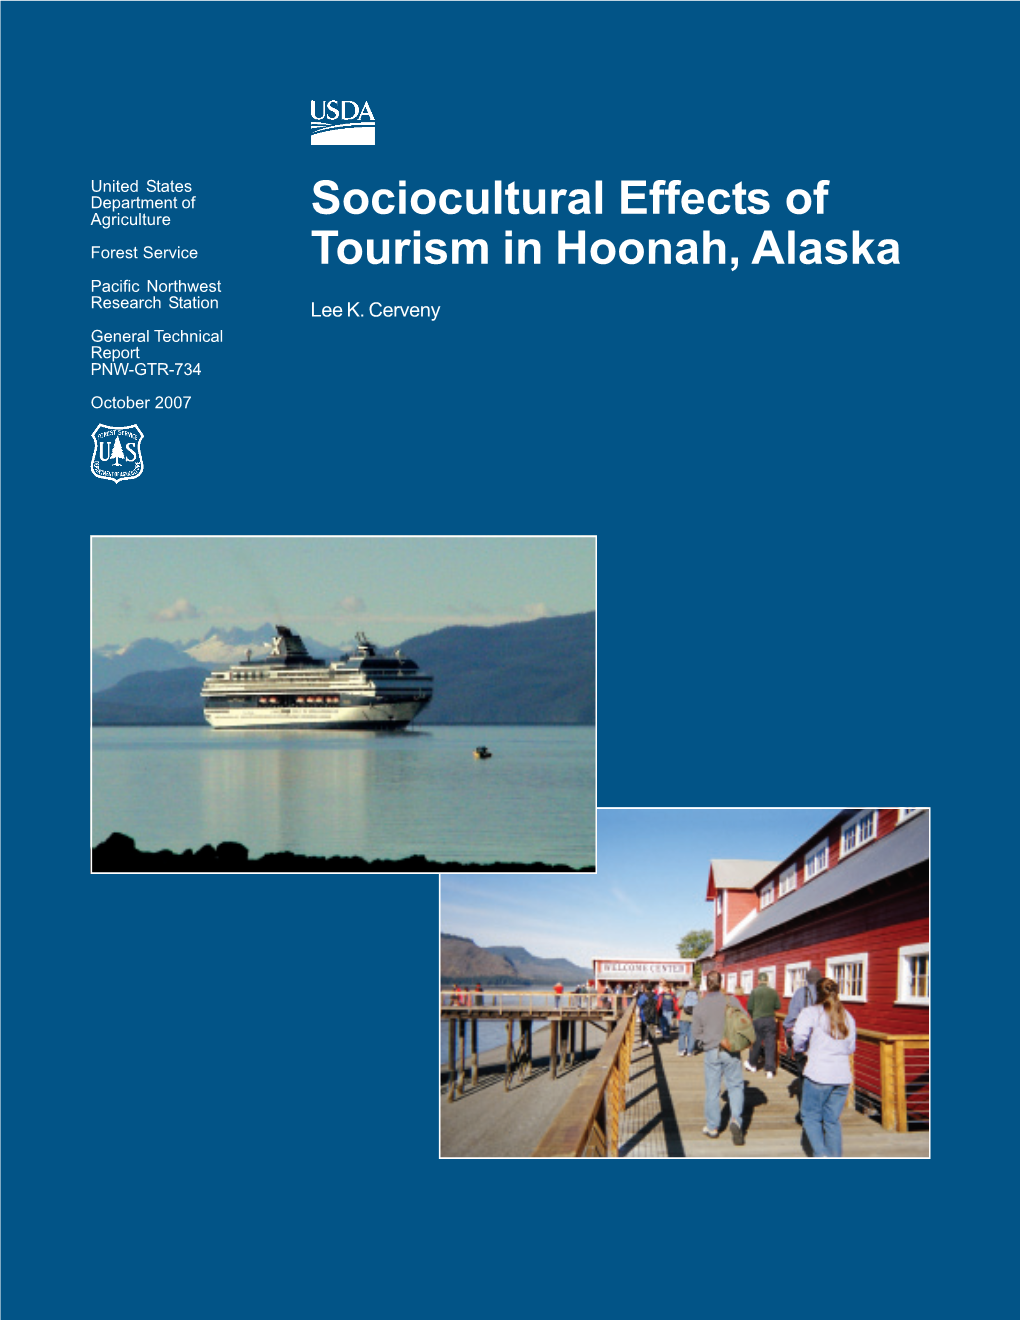 Sociocultural Effects of Tourism in Hoonah, Alaska